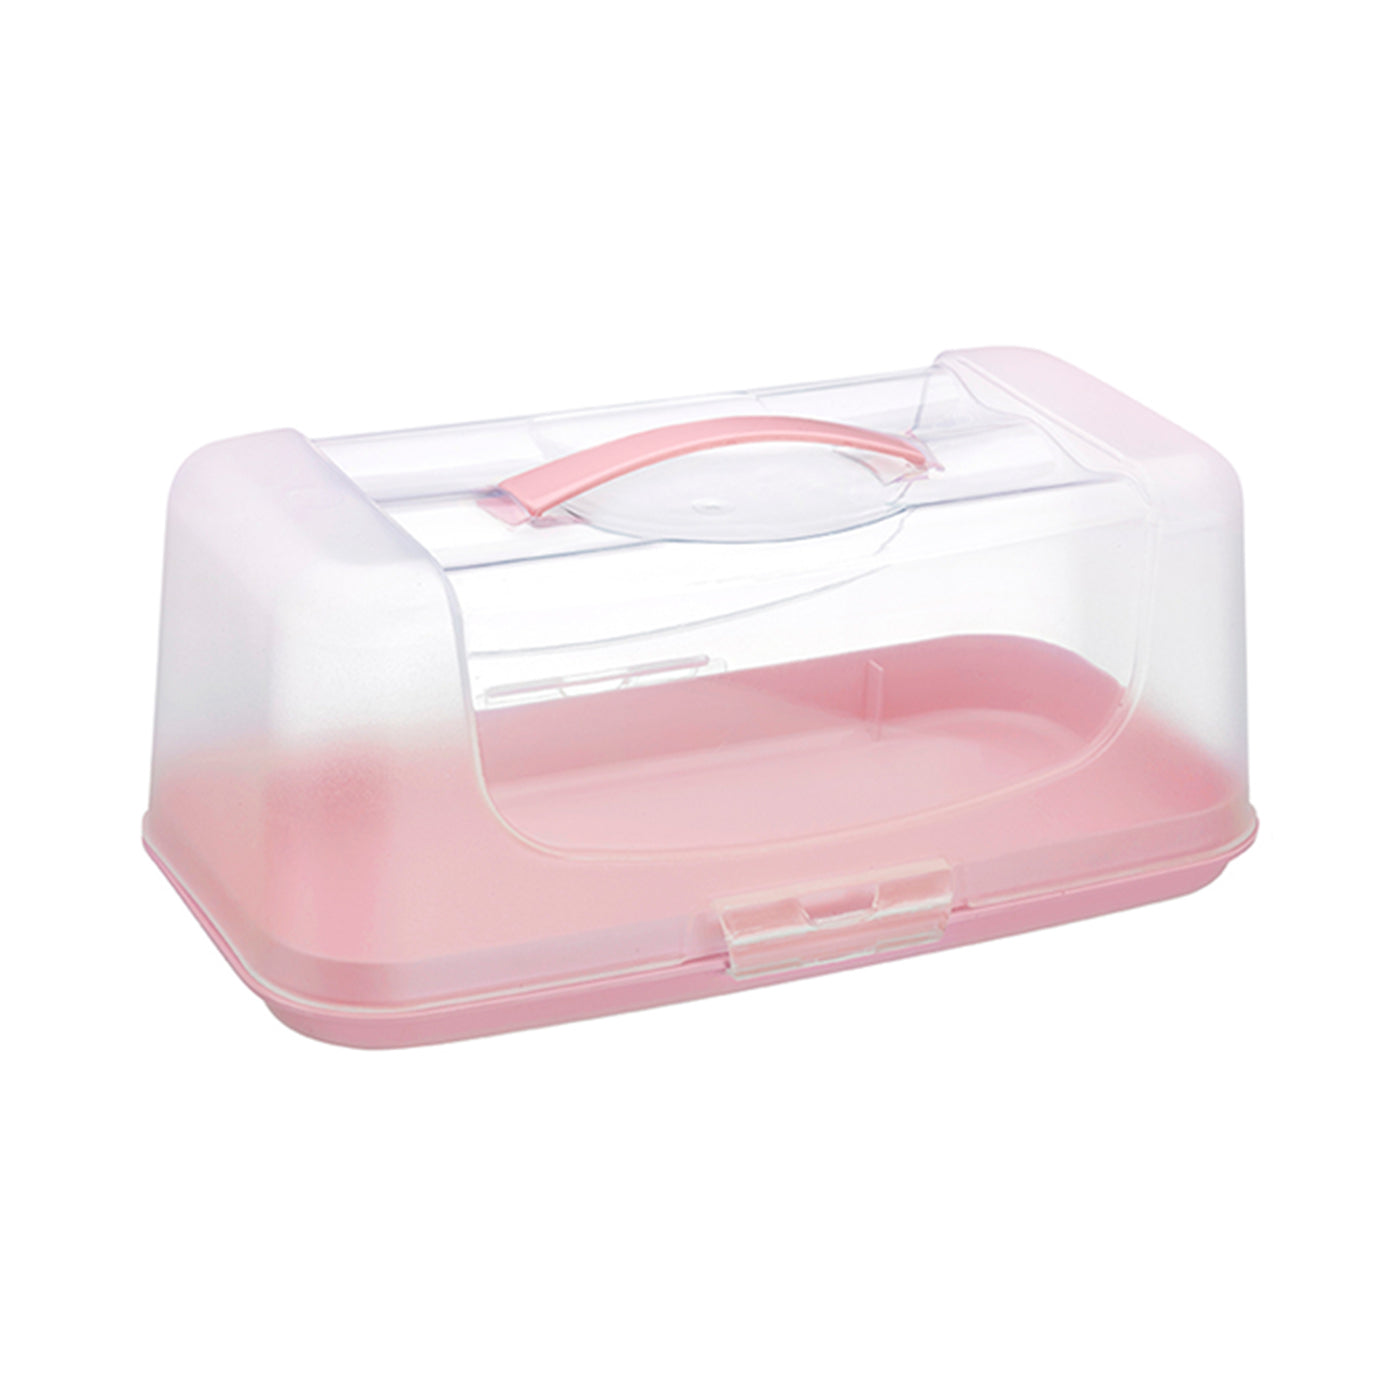 10-11 Plastic Disposable Cake Containers India | Ubuy